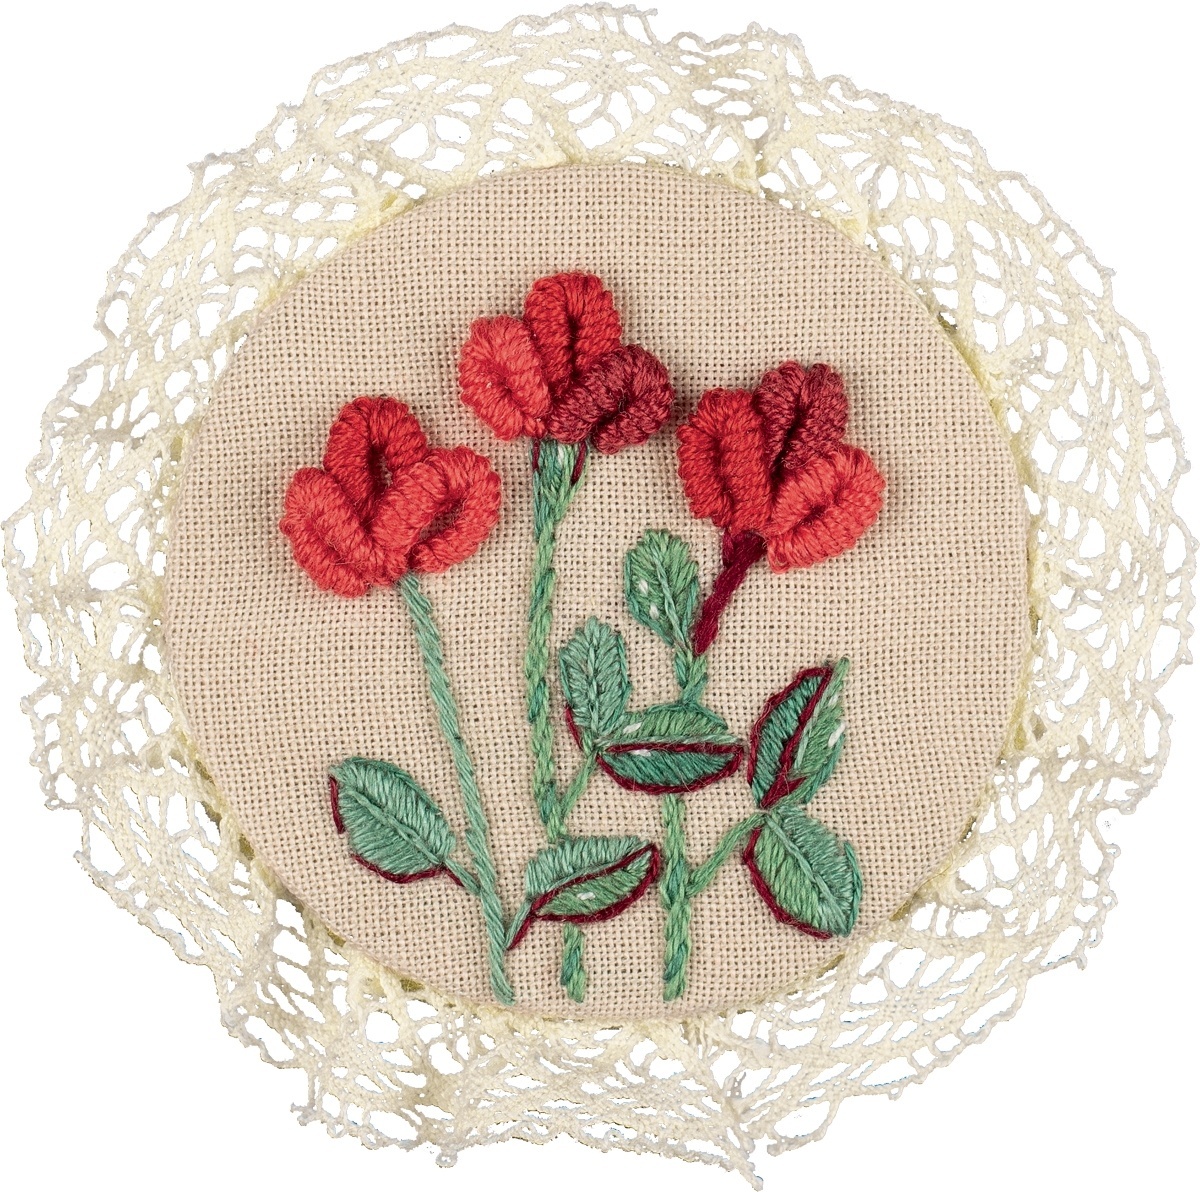 Vintage Brooches. Thistle and Poppy Embroidery Kit фото 7